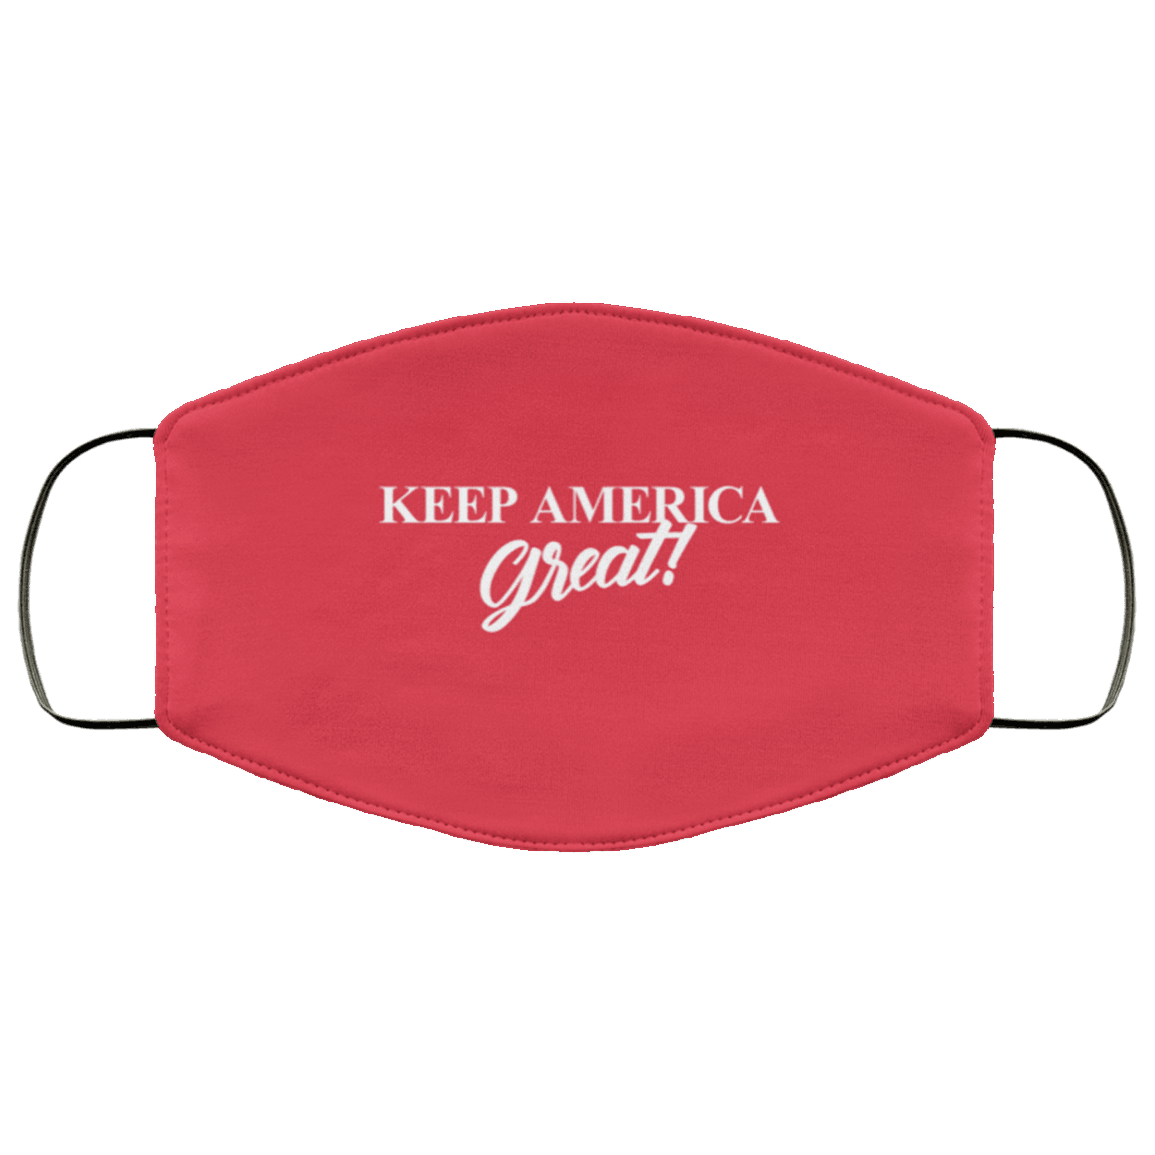 Designs by MyUtopia Shout Out:Keep America Great Trump Adult Fabric Face Mask with Elastic Ear Loops,3 Layer Fabric Face Mask / Red / Adult,Fabric Face Mask